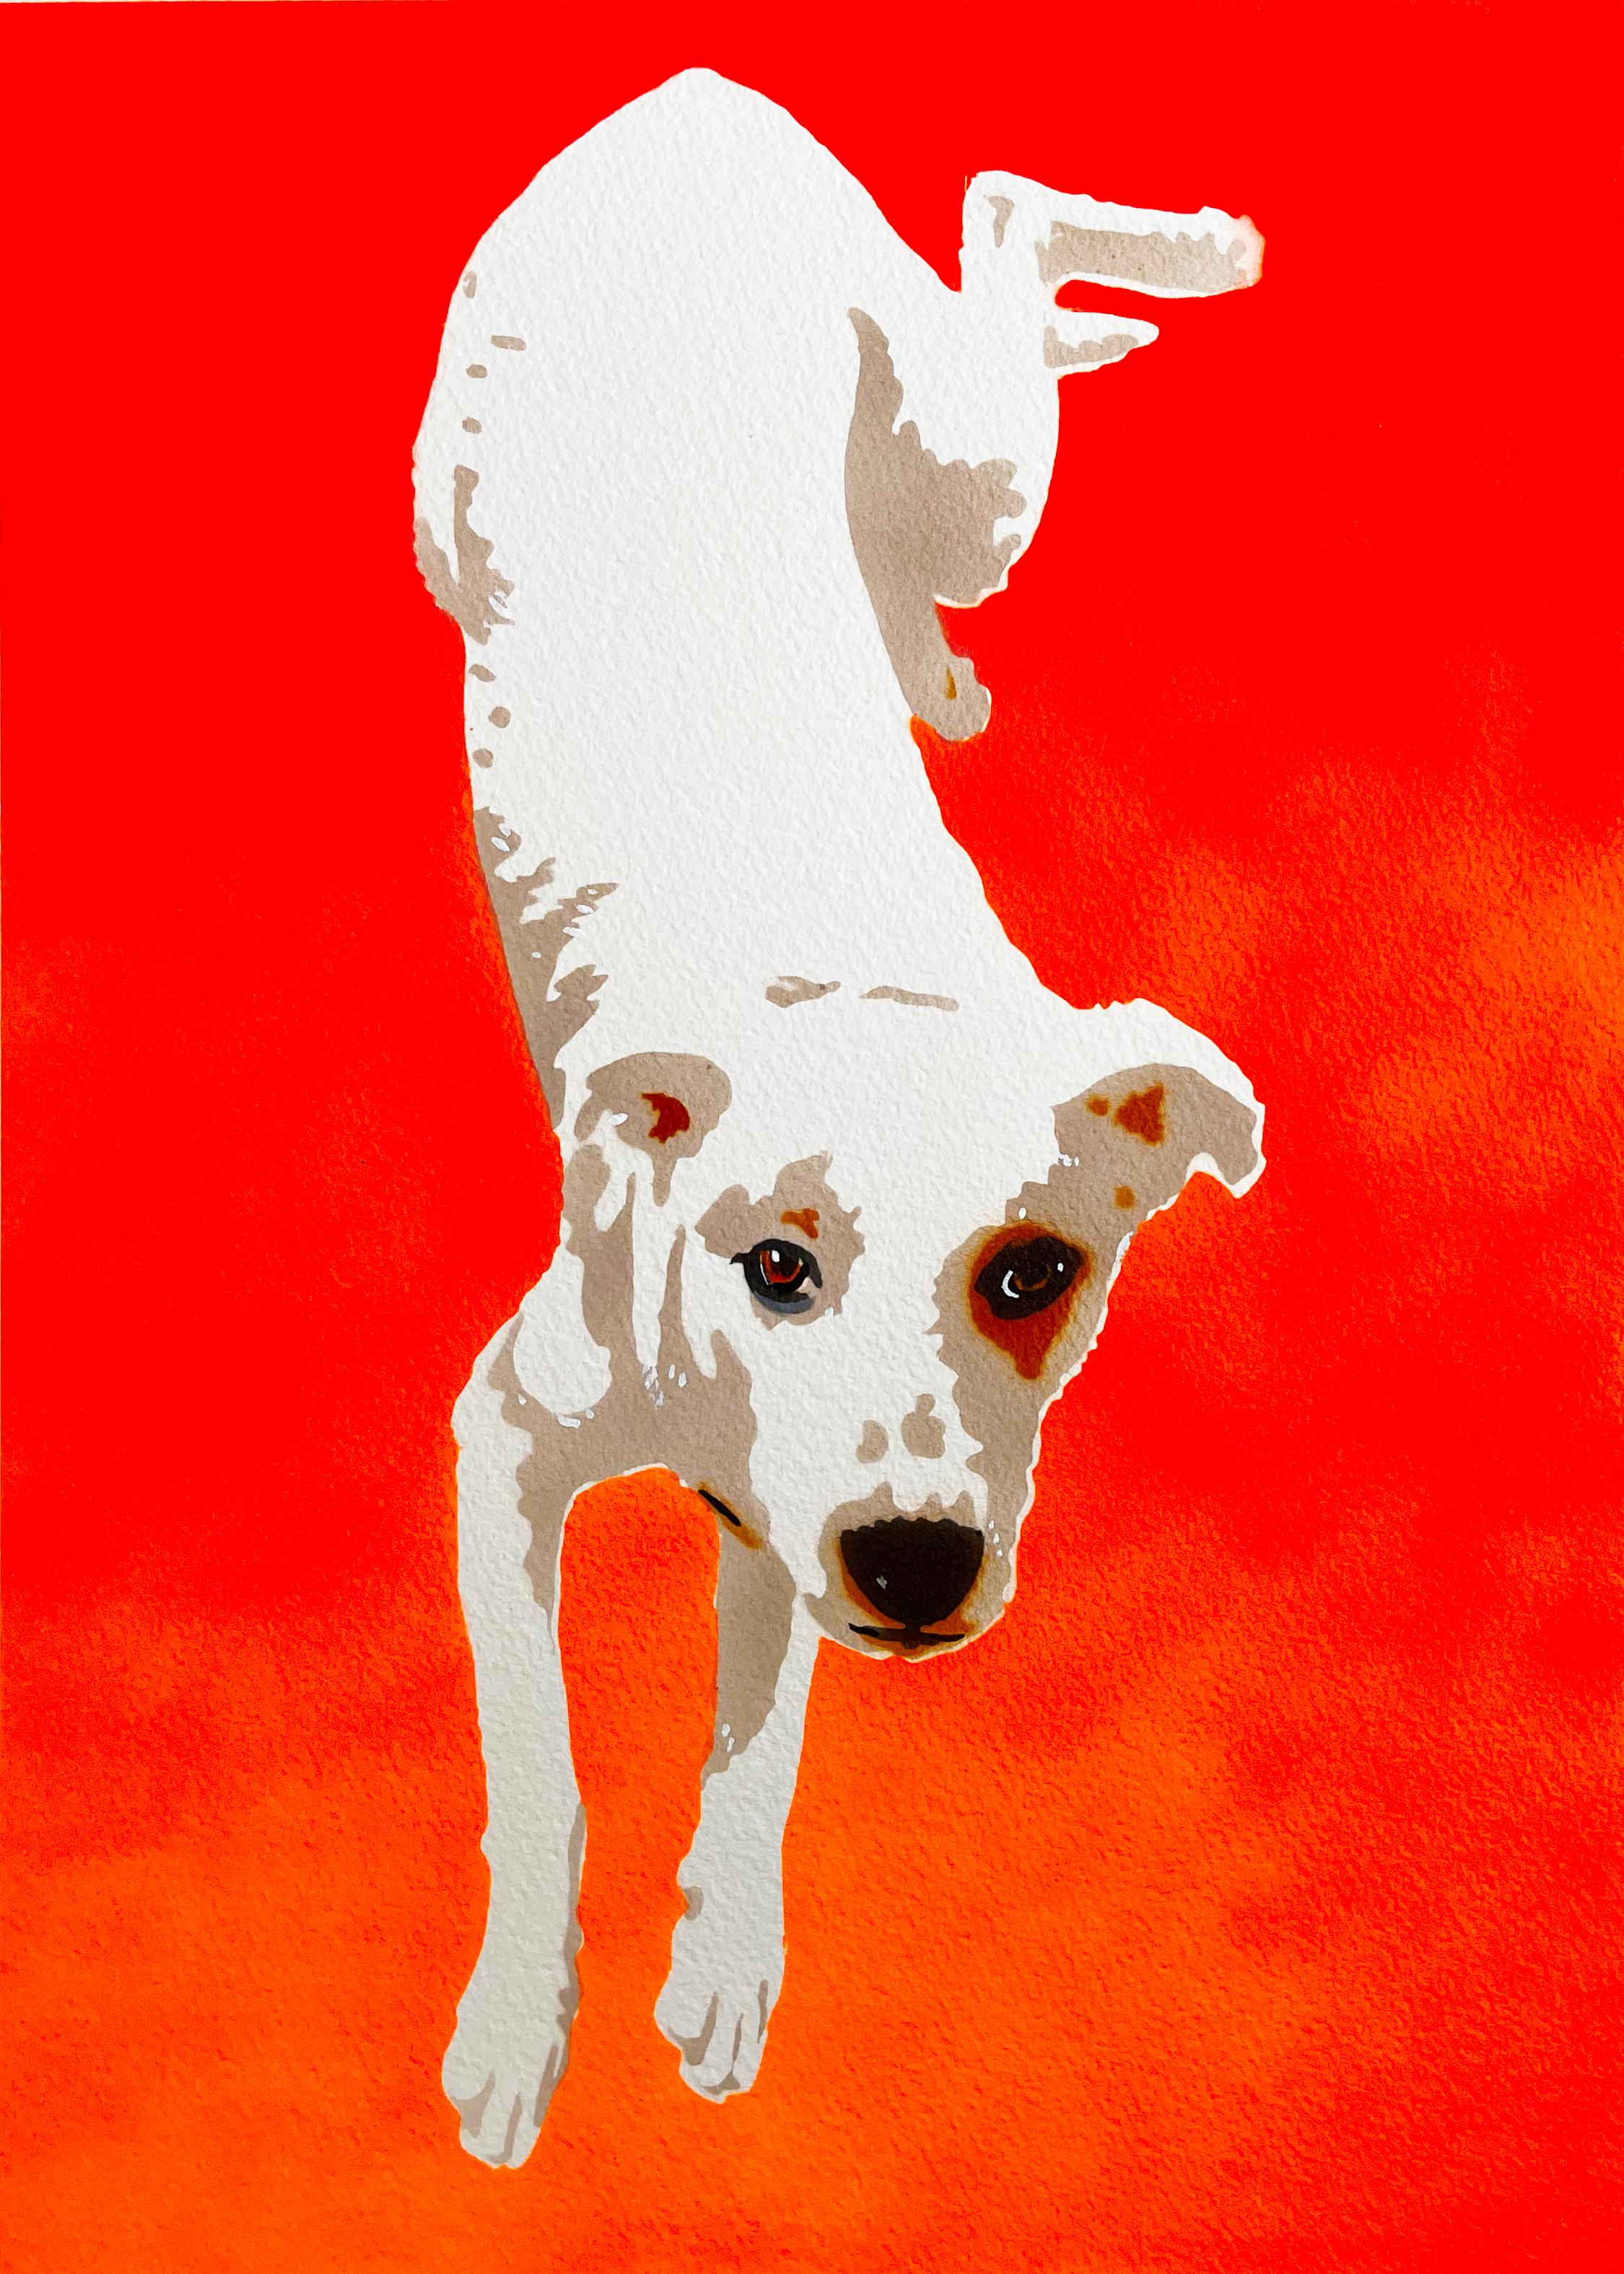 Gracie Tip Toe, Mixed Media on Paper - Mixed Media Art by Dwayne Wolff